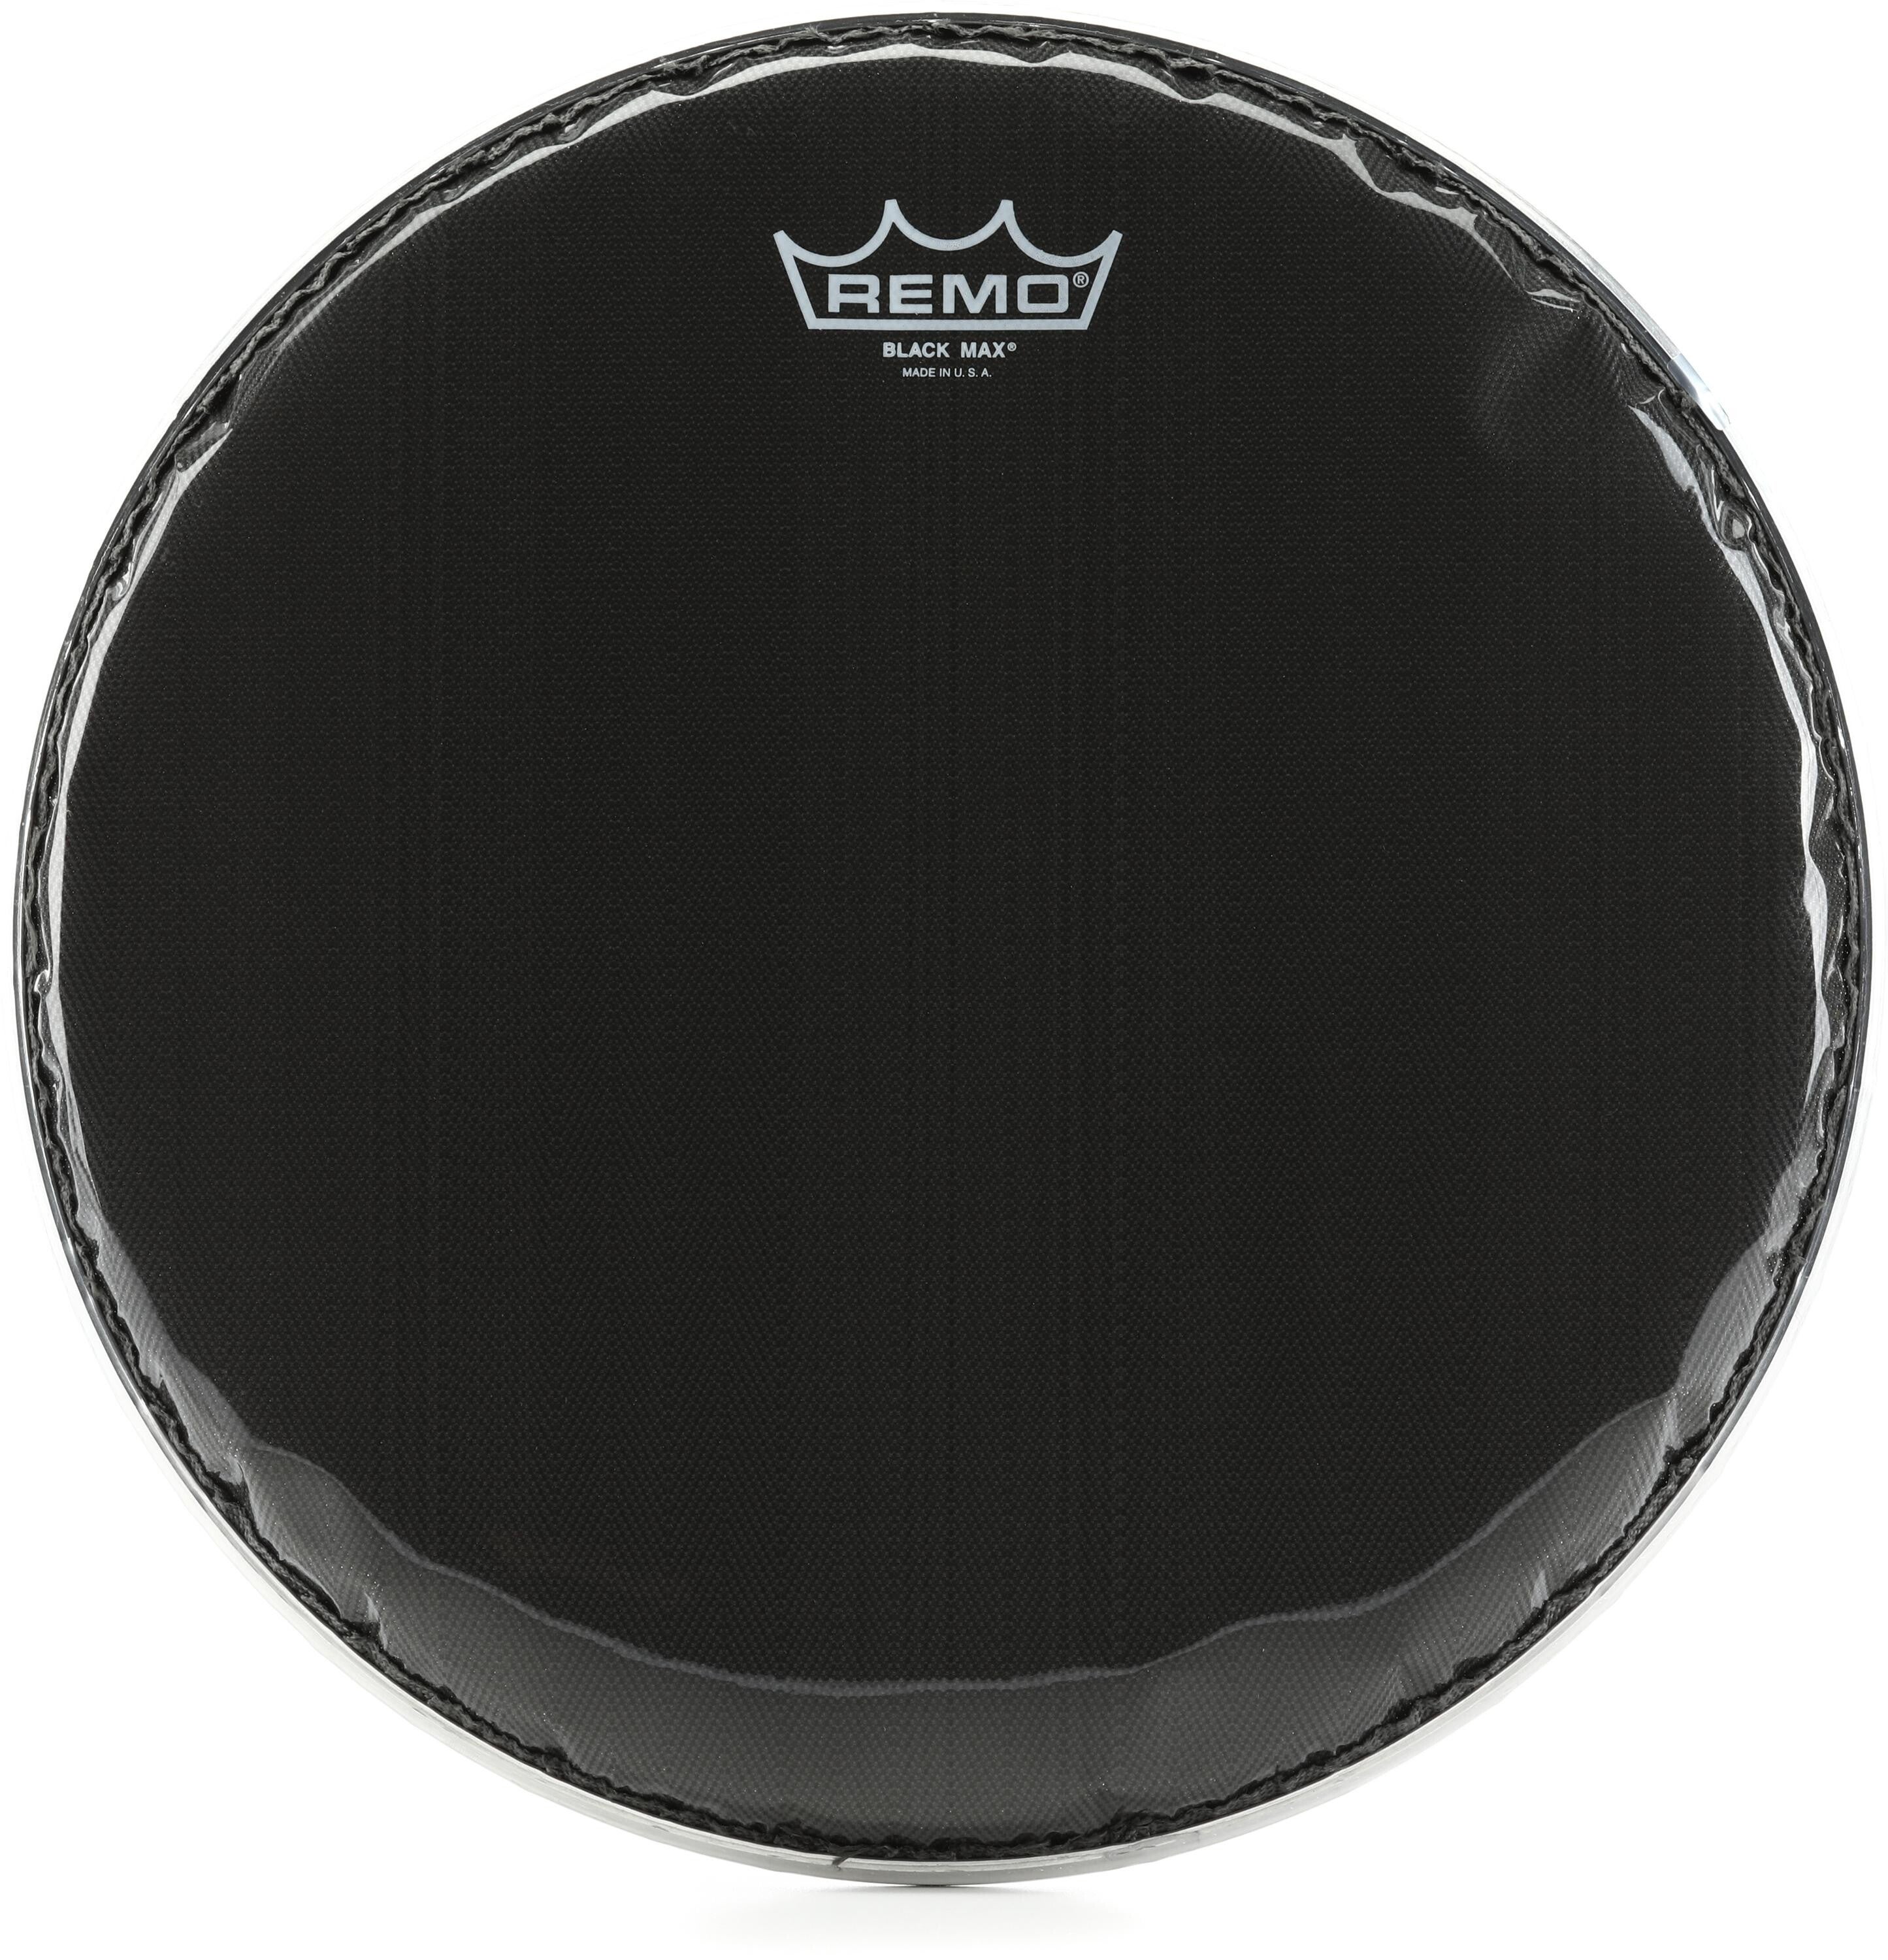 Remo Black Max Snare Drumhead - 13-inch | Sweetwater